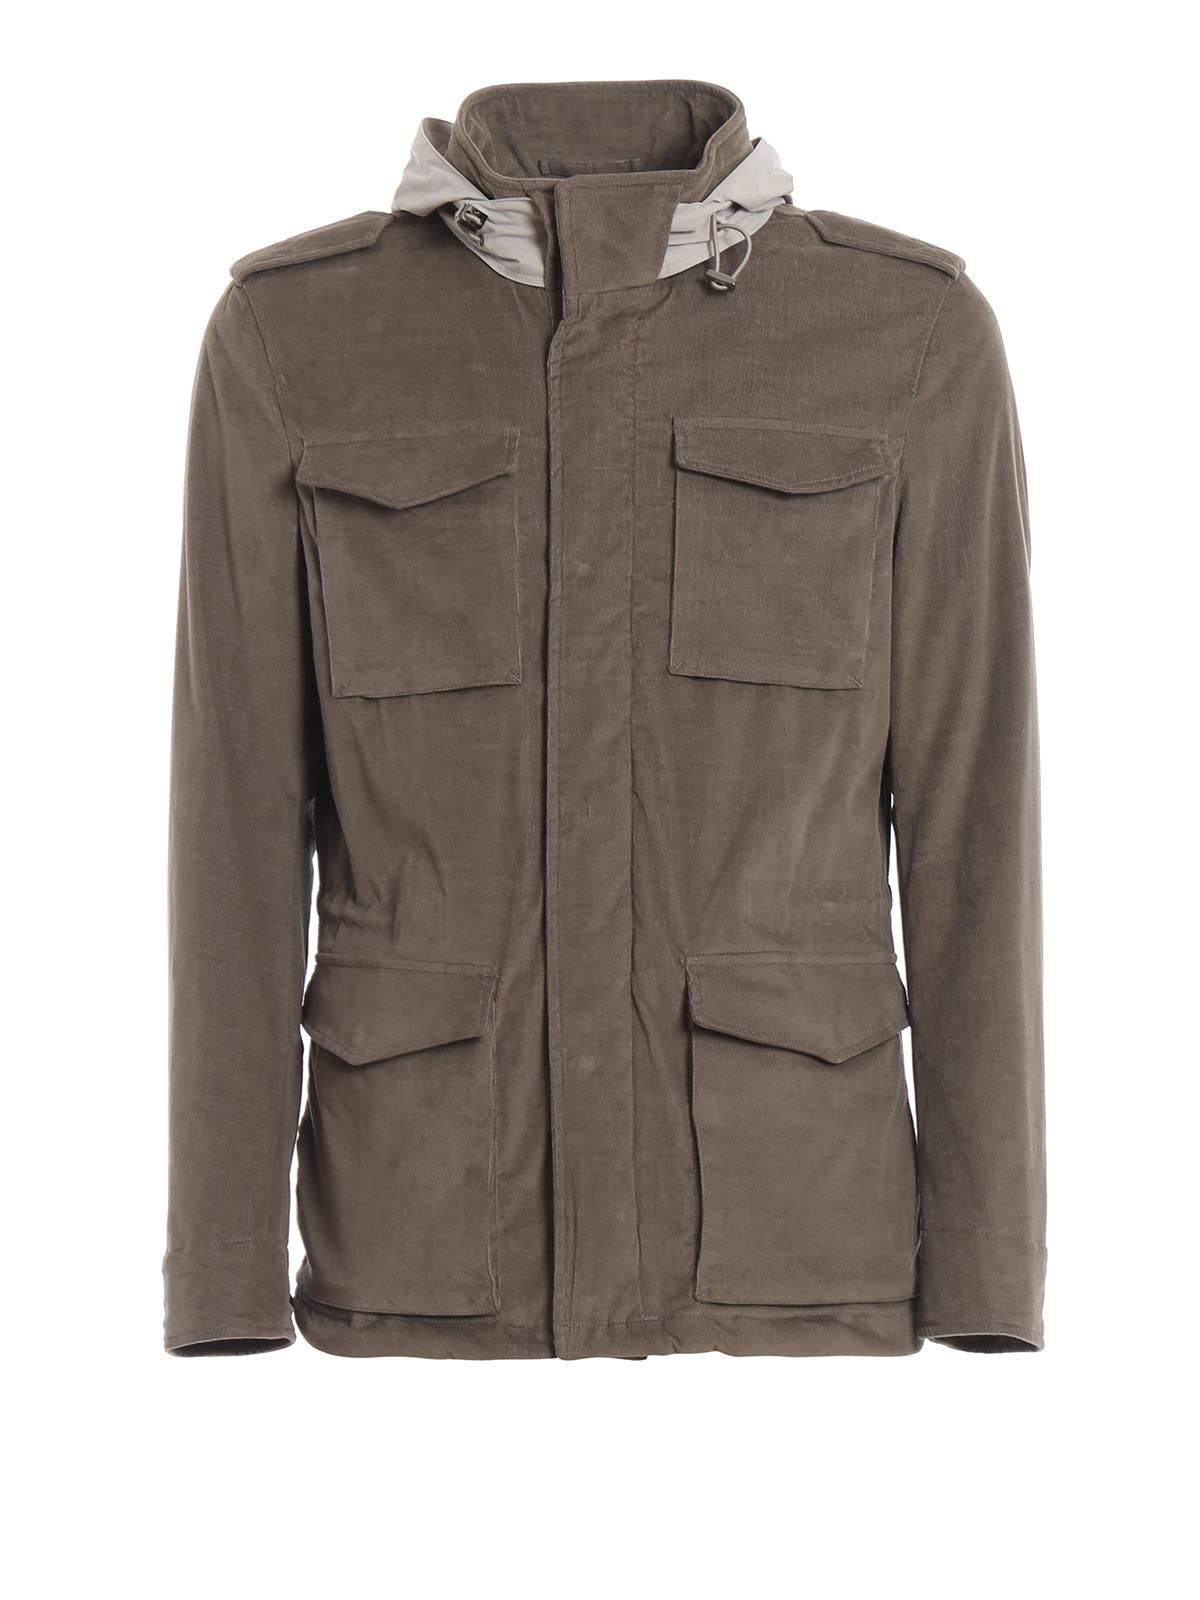 Herno Taupe Corduroy Field Jacket in Brown for Men - Lyst